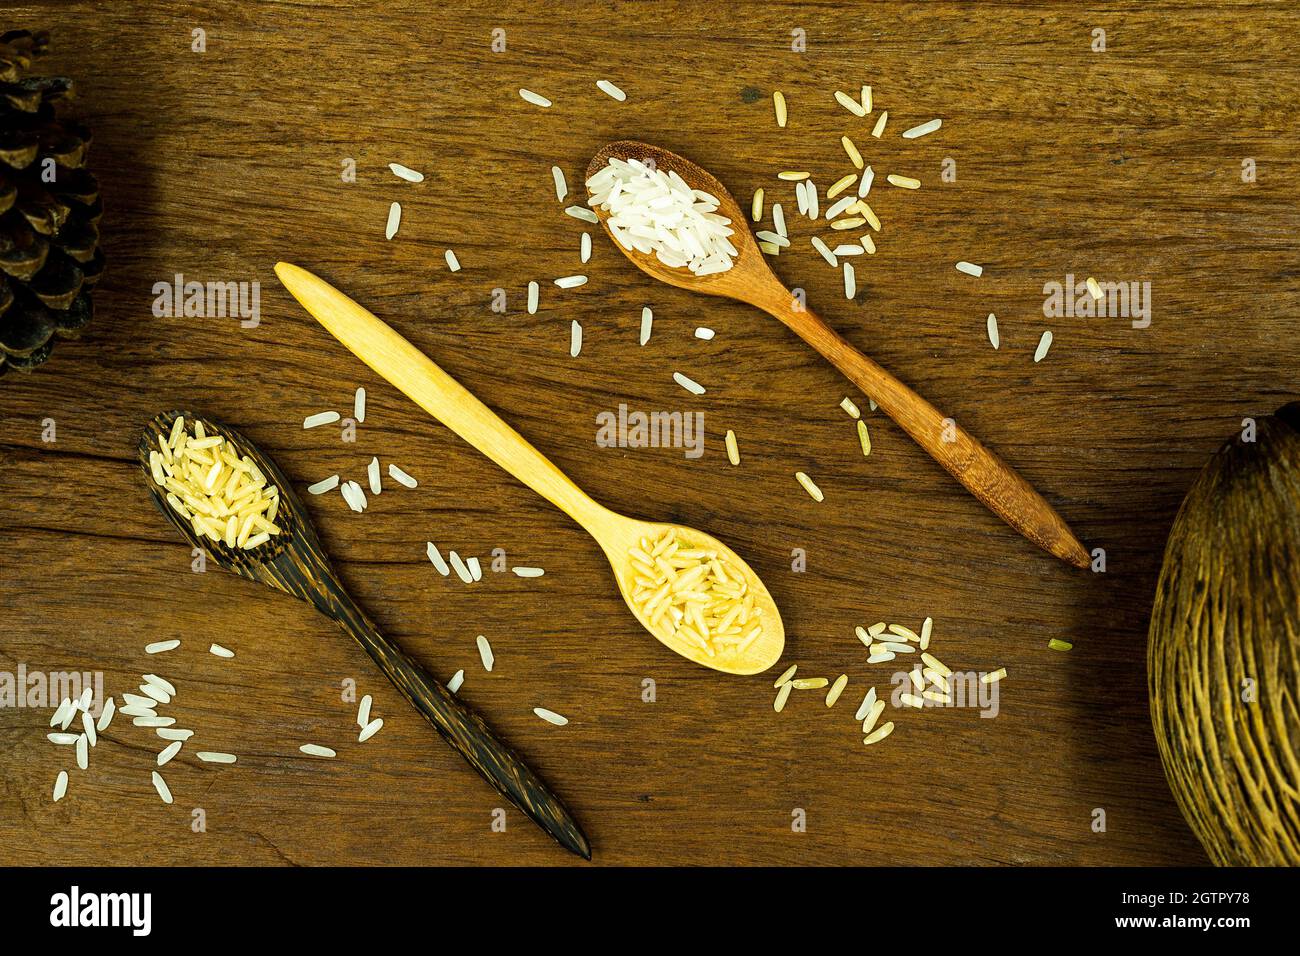 High Angle View Of Multigrain Rics And Wooden Spoin On Wooden Table Stock Photo